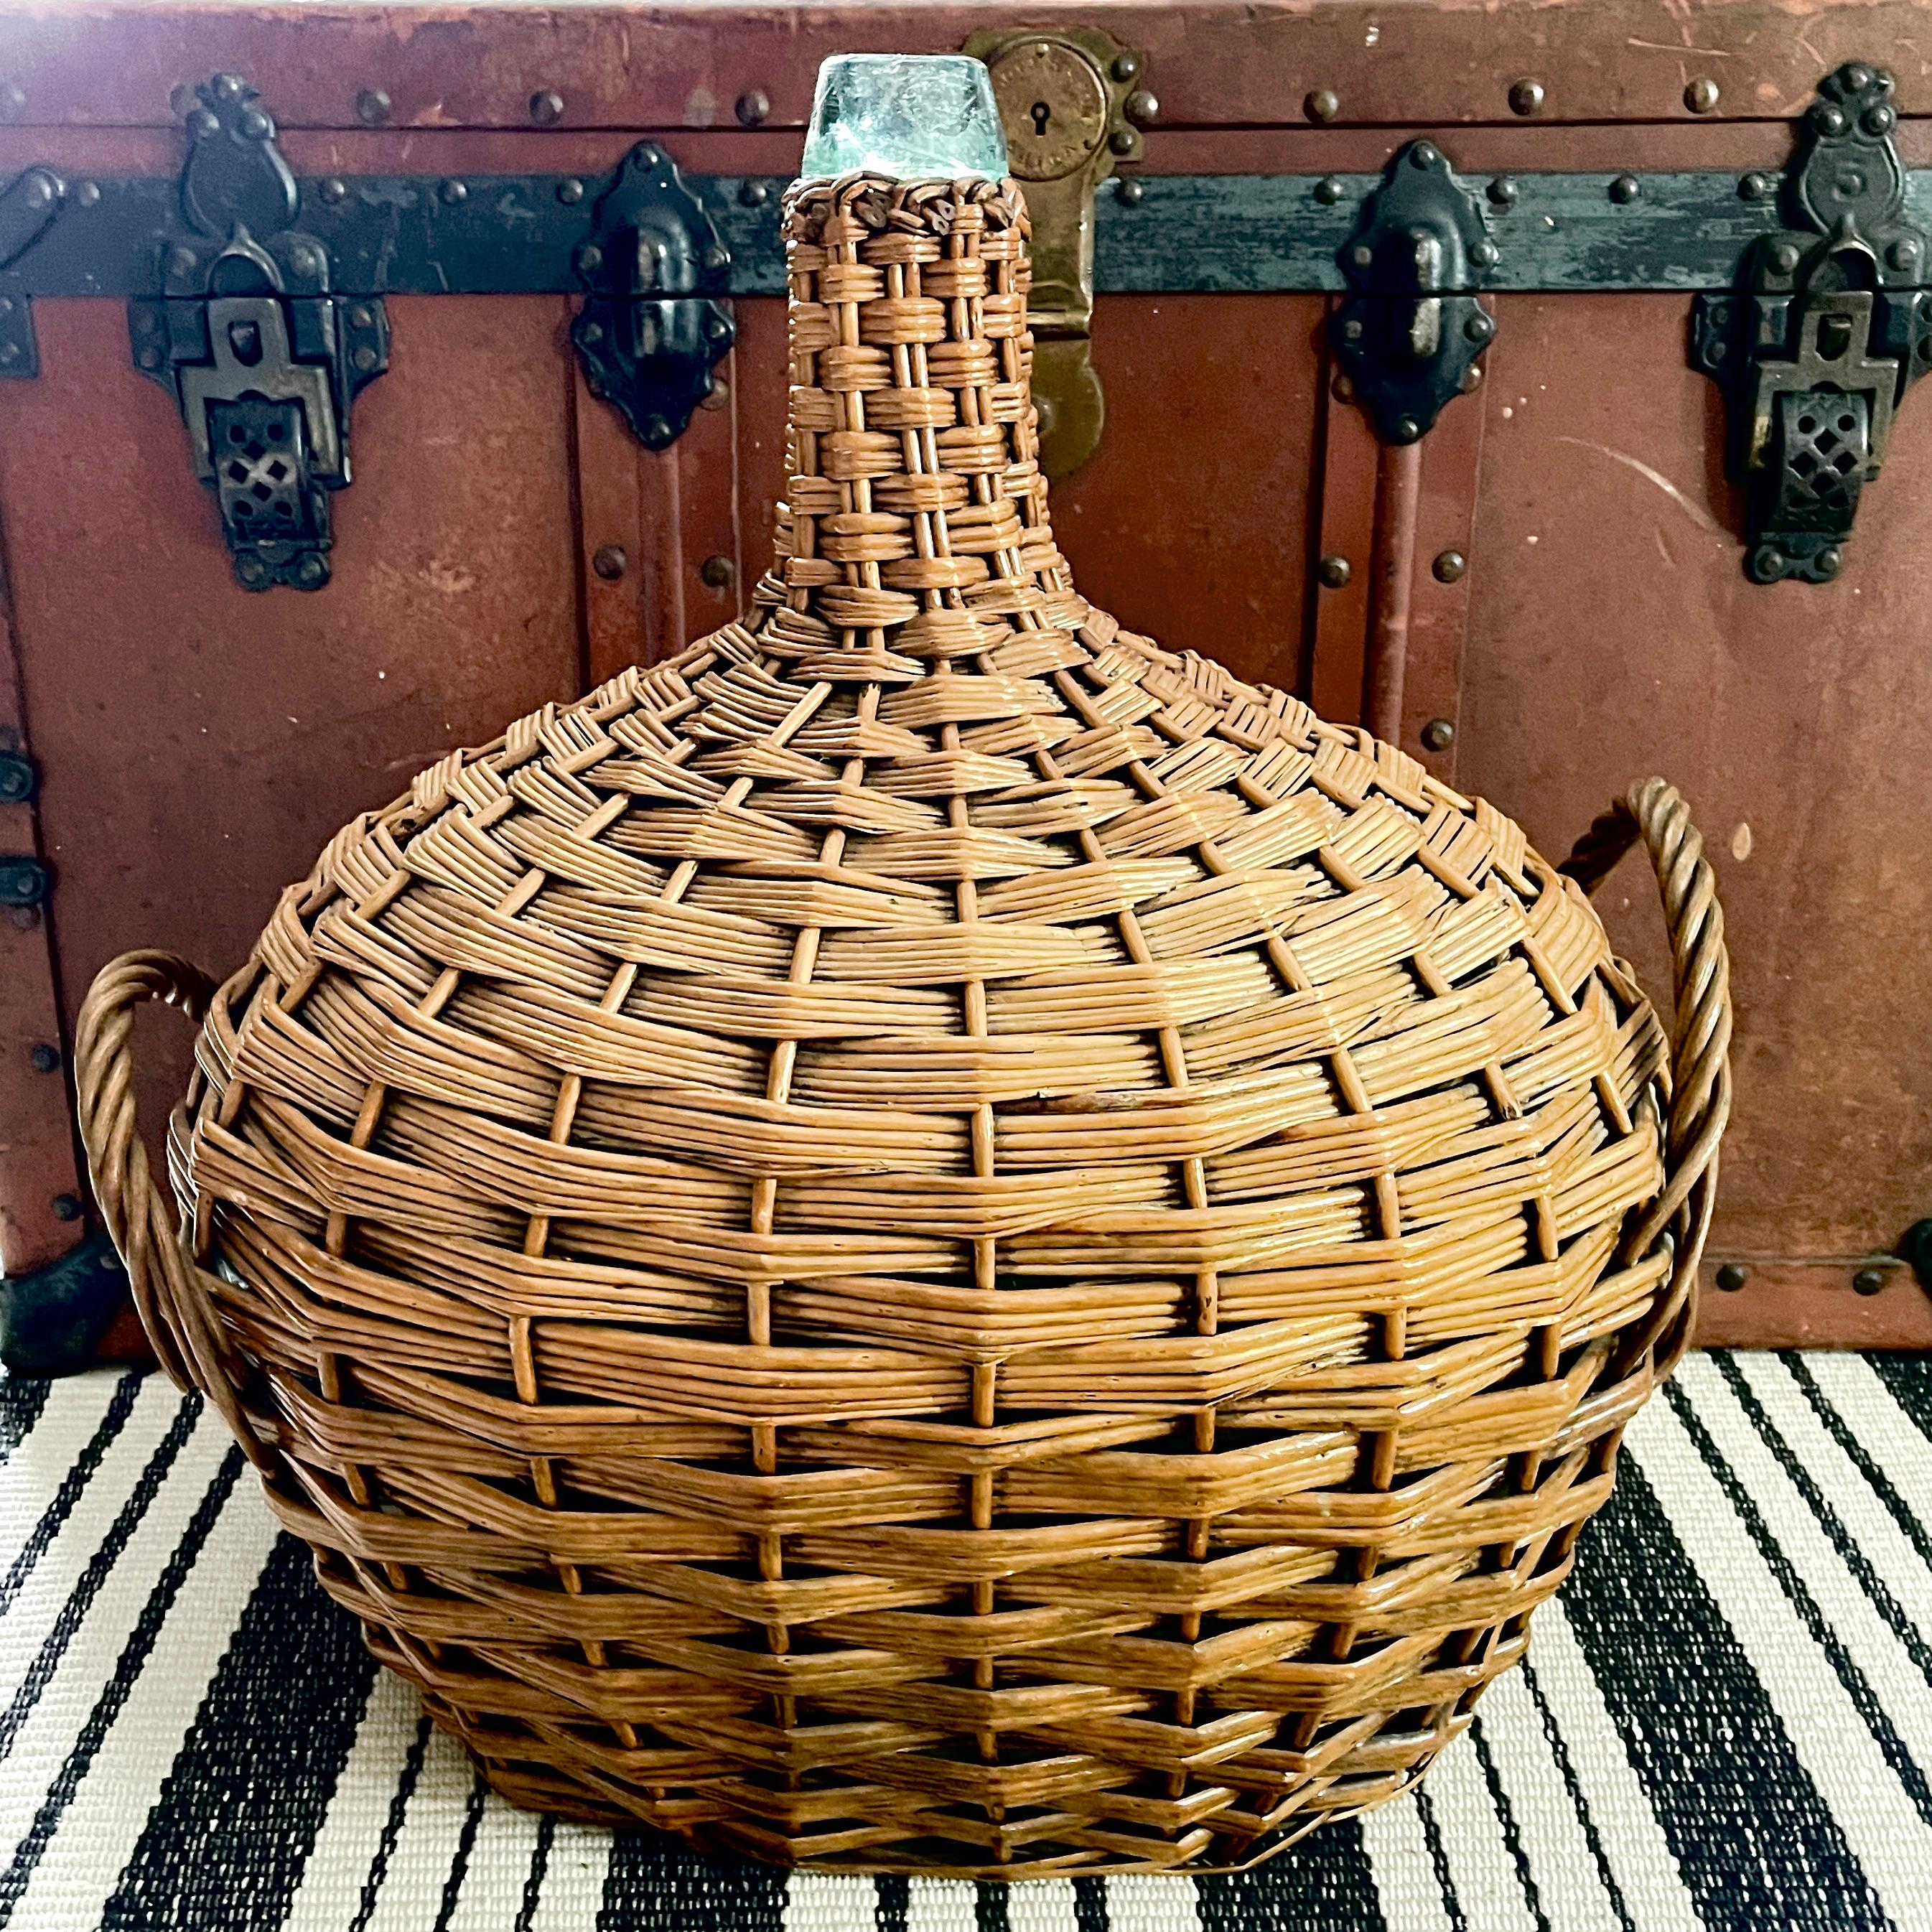 From France, a super-sized and unusual oval shaped carboy or demijohn, made up of a pale aqua colored, mouth blown glass bottle clad in a hand woven wicker casing with side carrying handles. Circa 1900.

The wicker helped protect the glass bottles